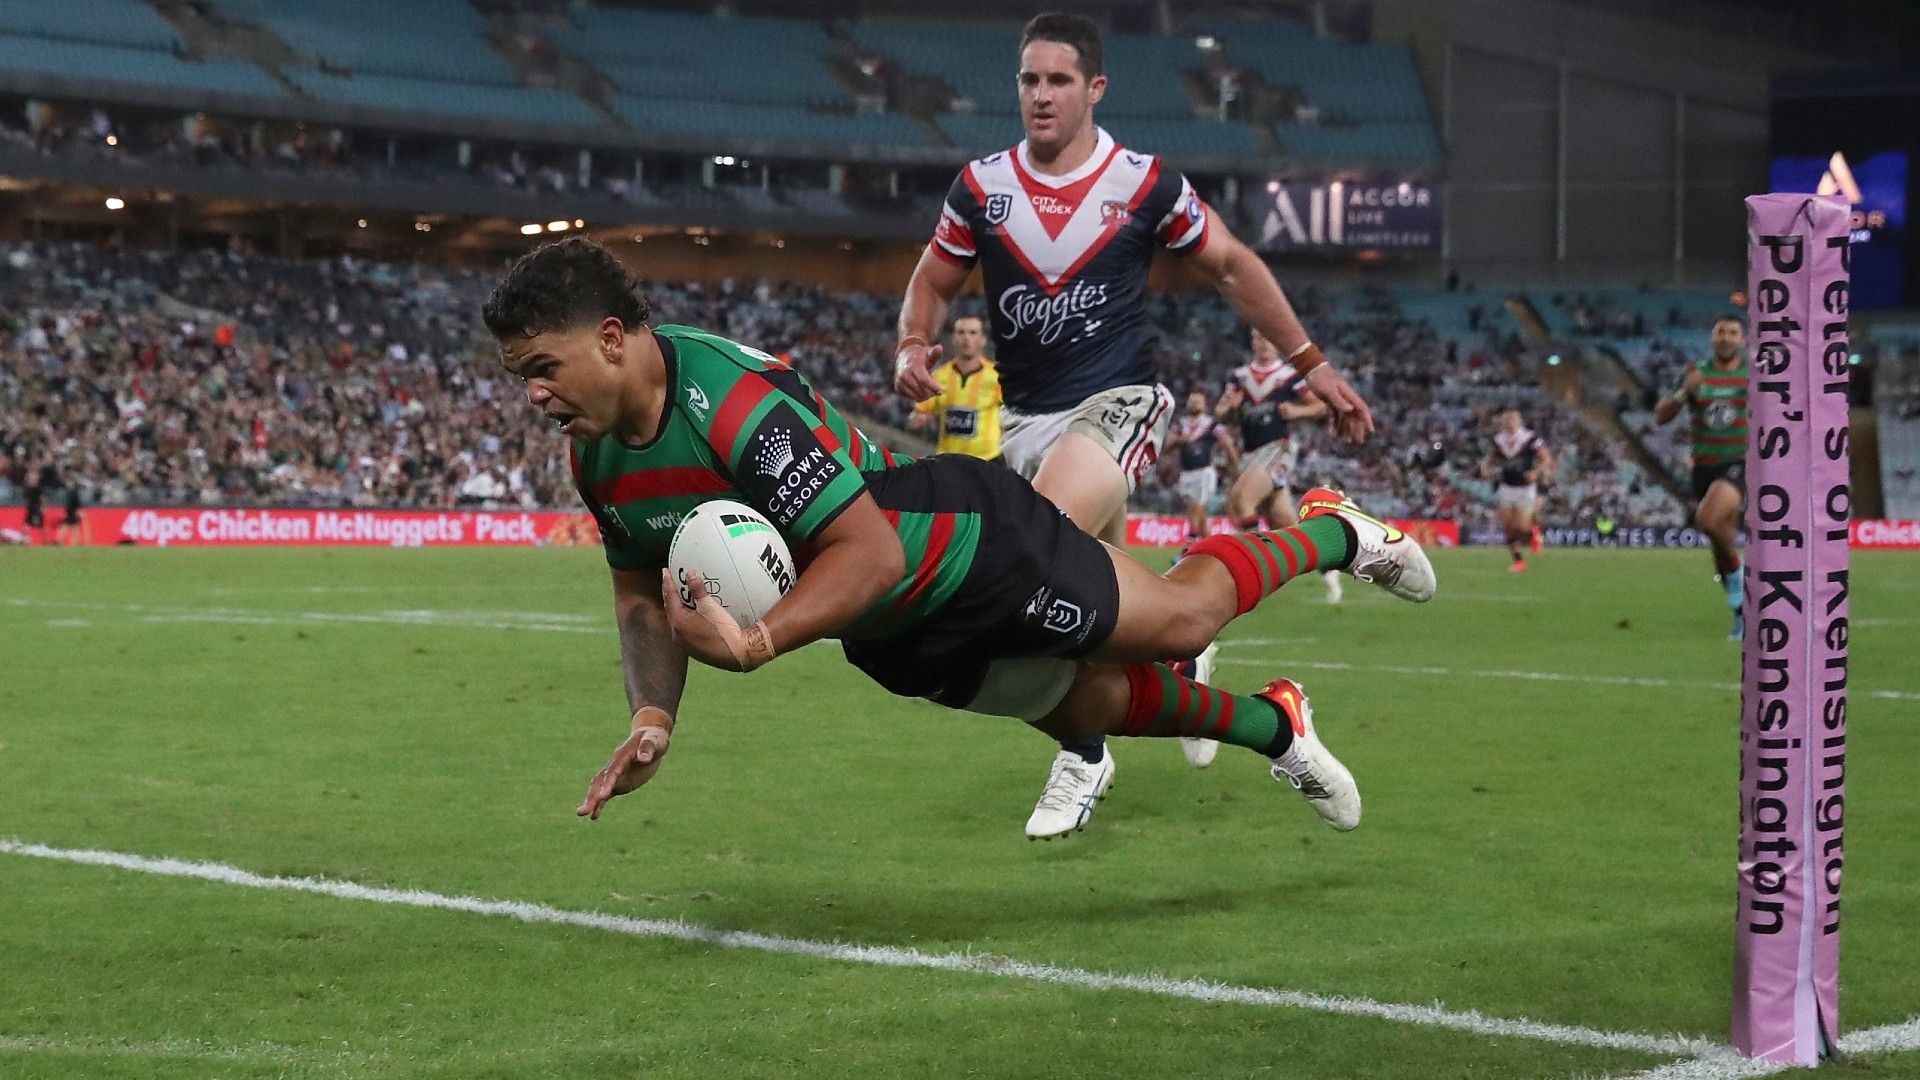 Latrell Mitchell streaks away to seal victory in bitter grudge match